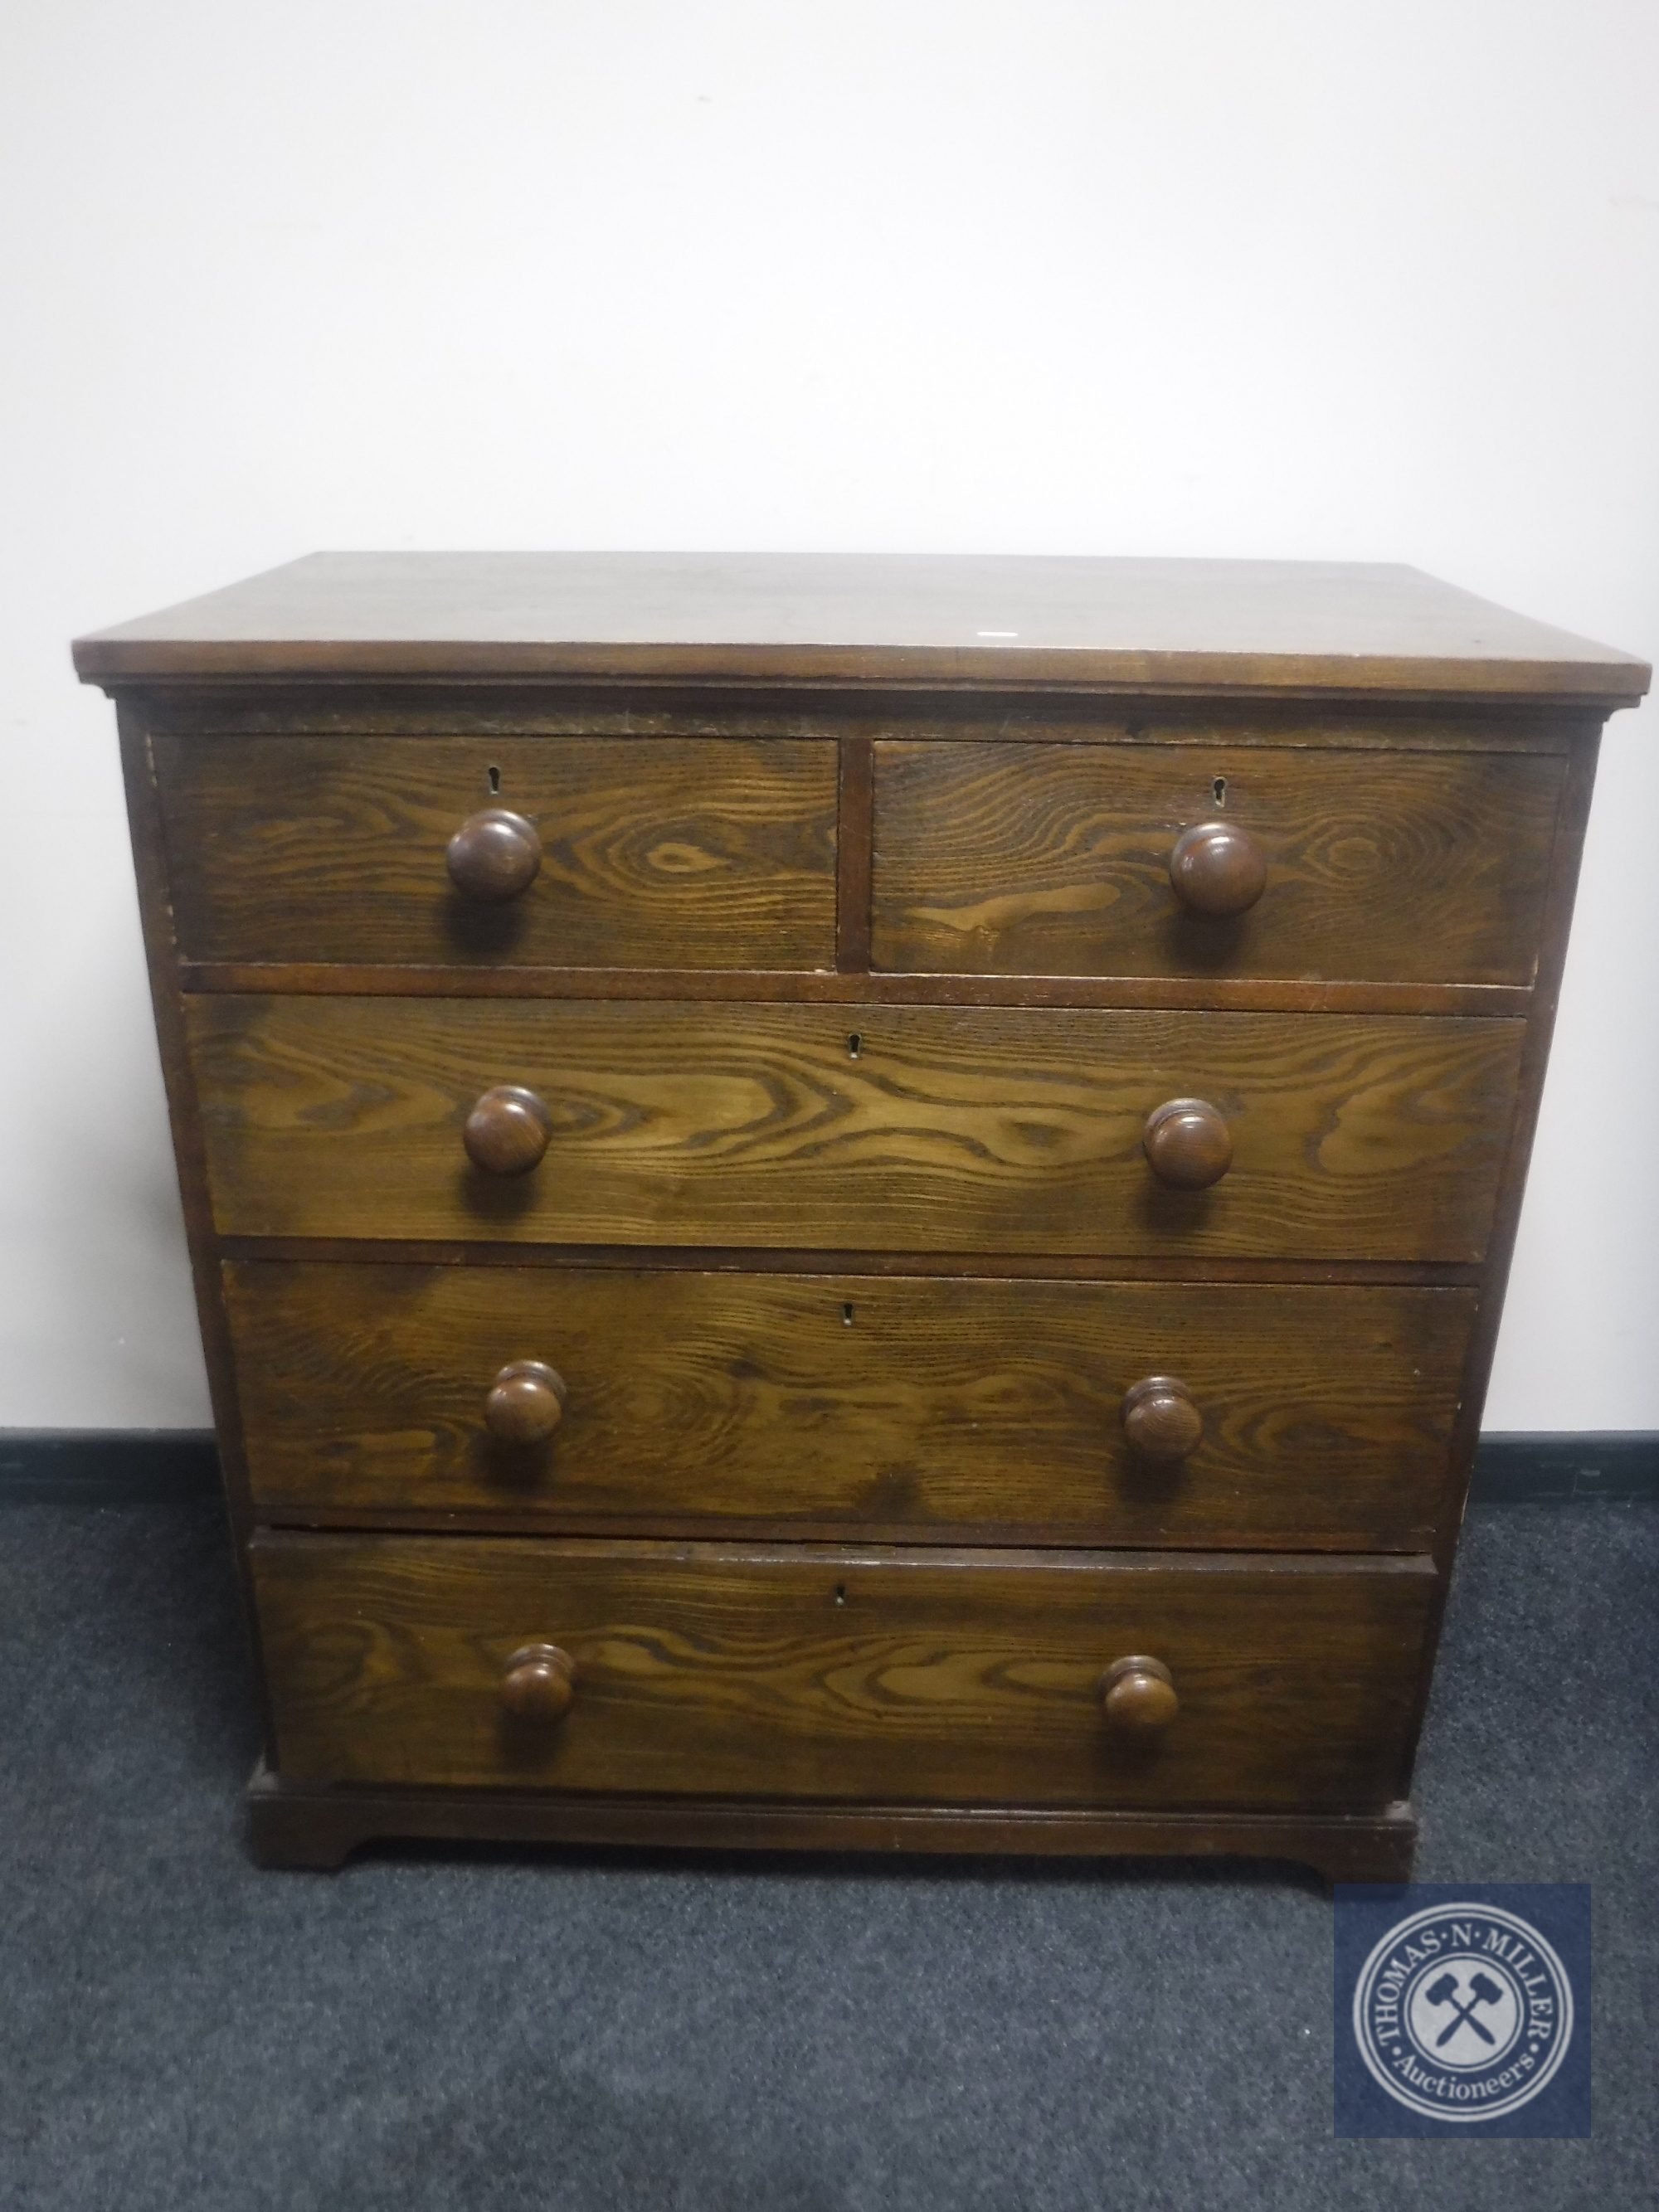 An Edwardian oak five drawer chest with knob handles